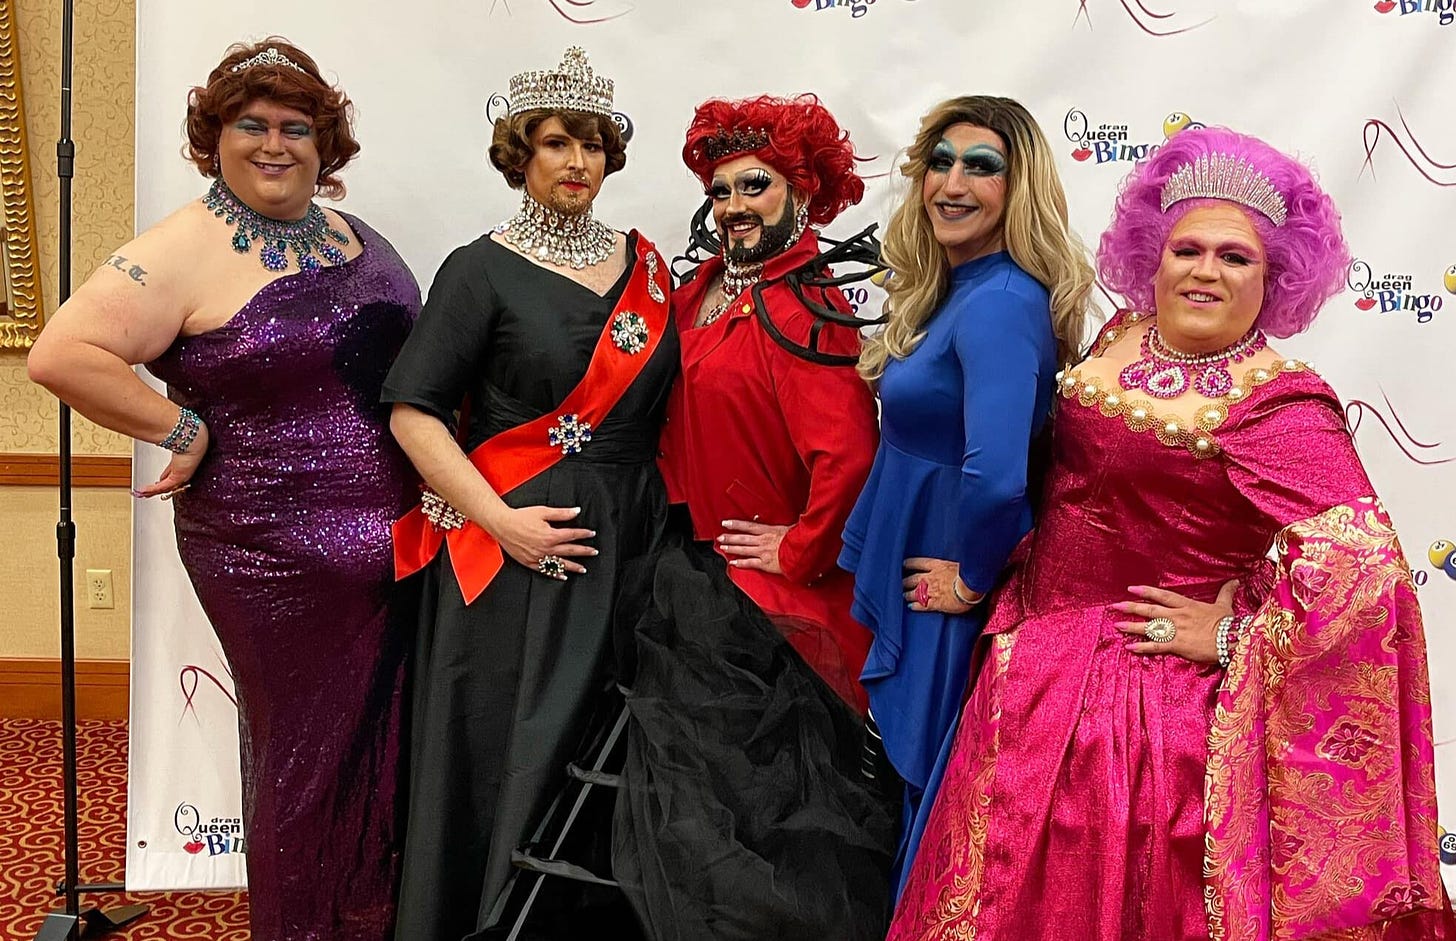 In royal dresses and tiaras, the Stilettos drag troupe poses for a photo.